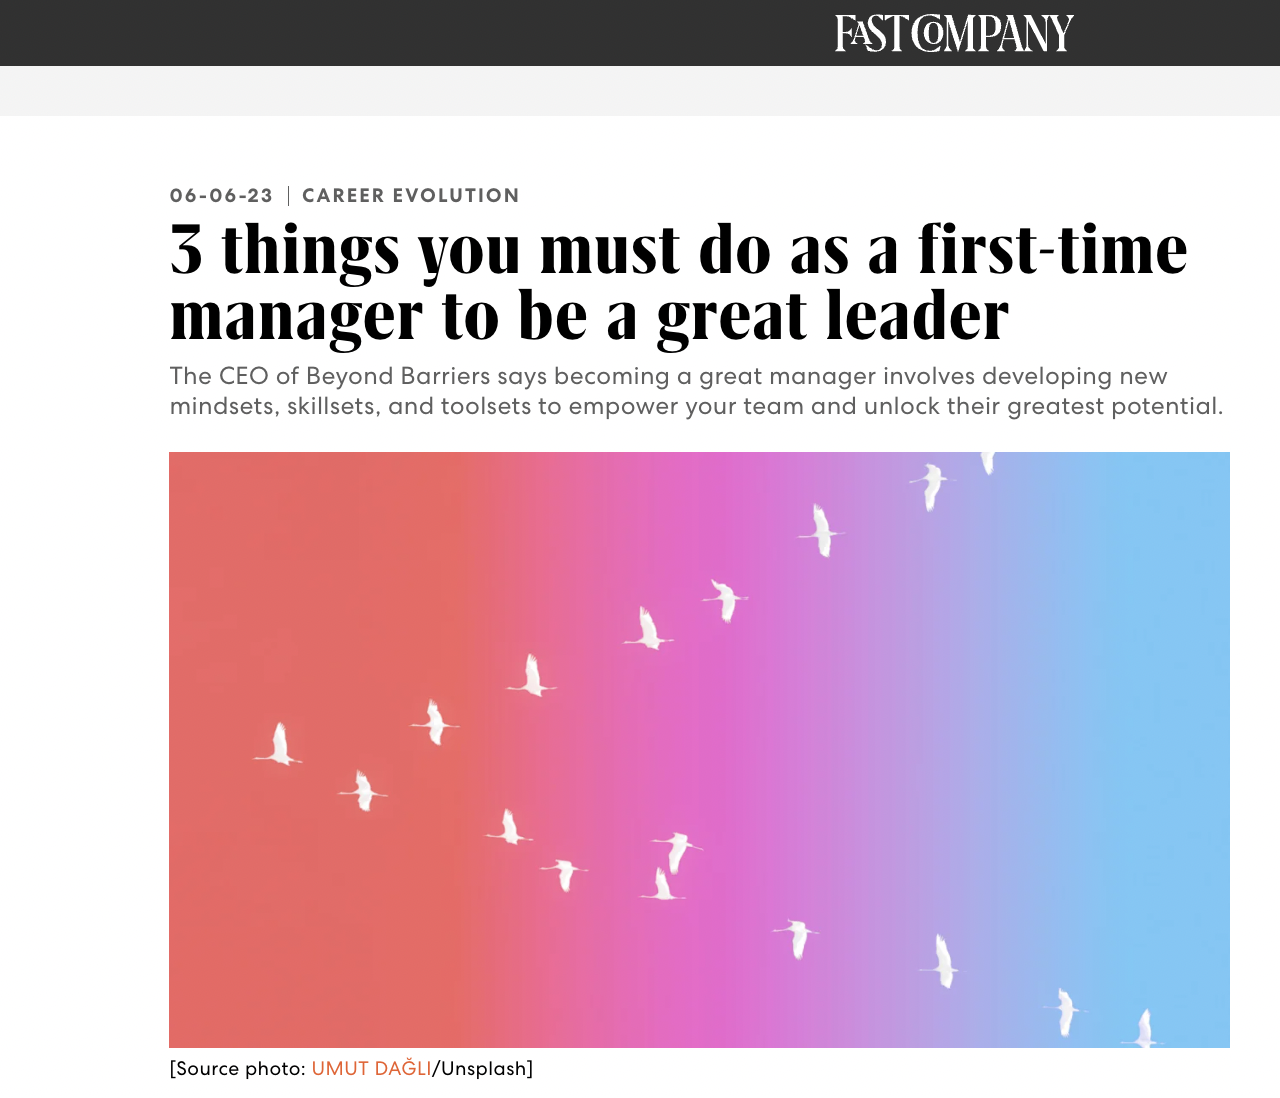 3 things you must do as a first-time manager to be a great leader